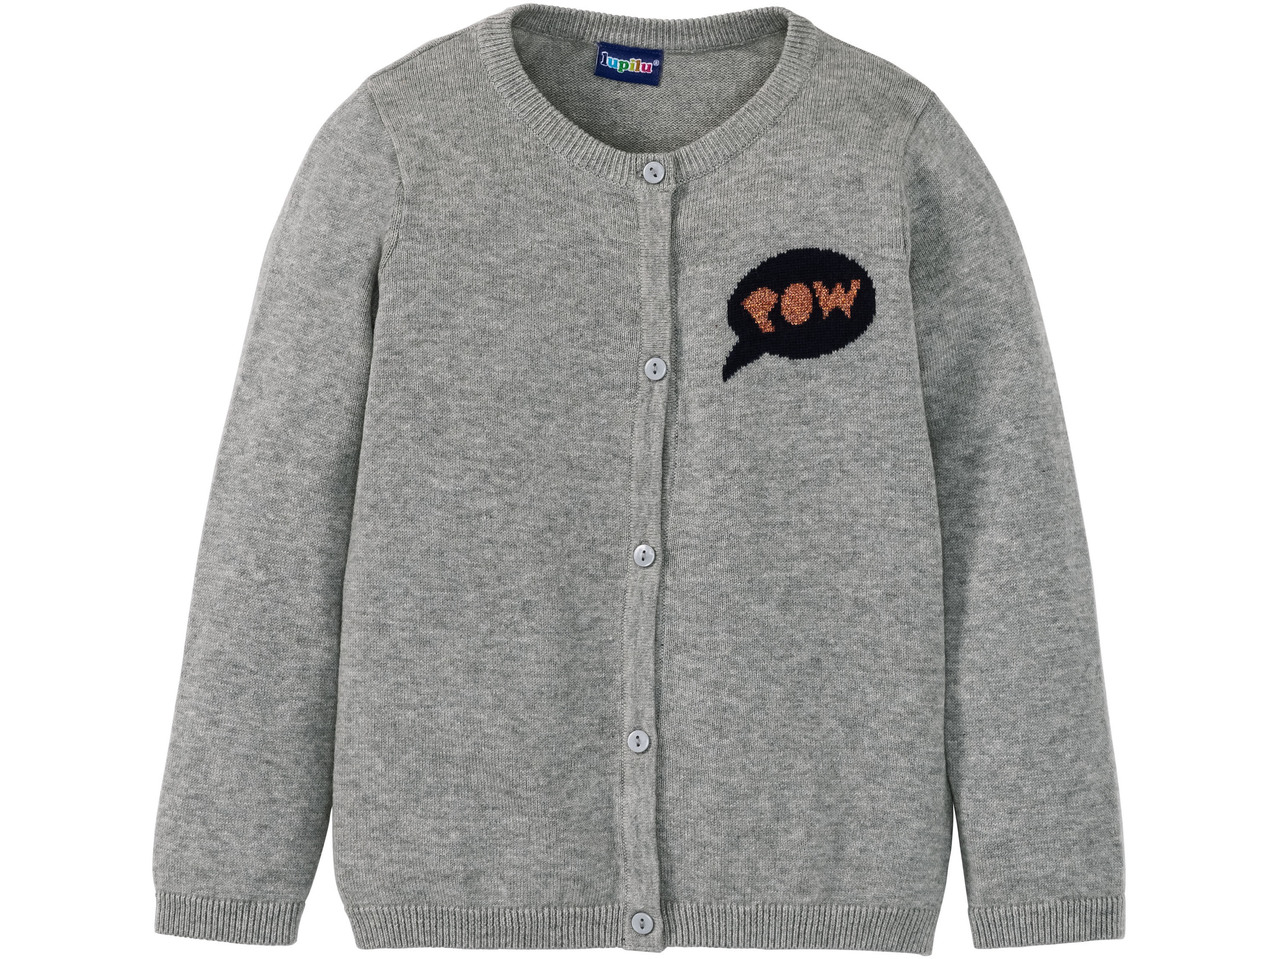 Girls' Cardigan or Pullover